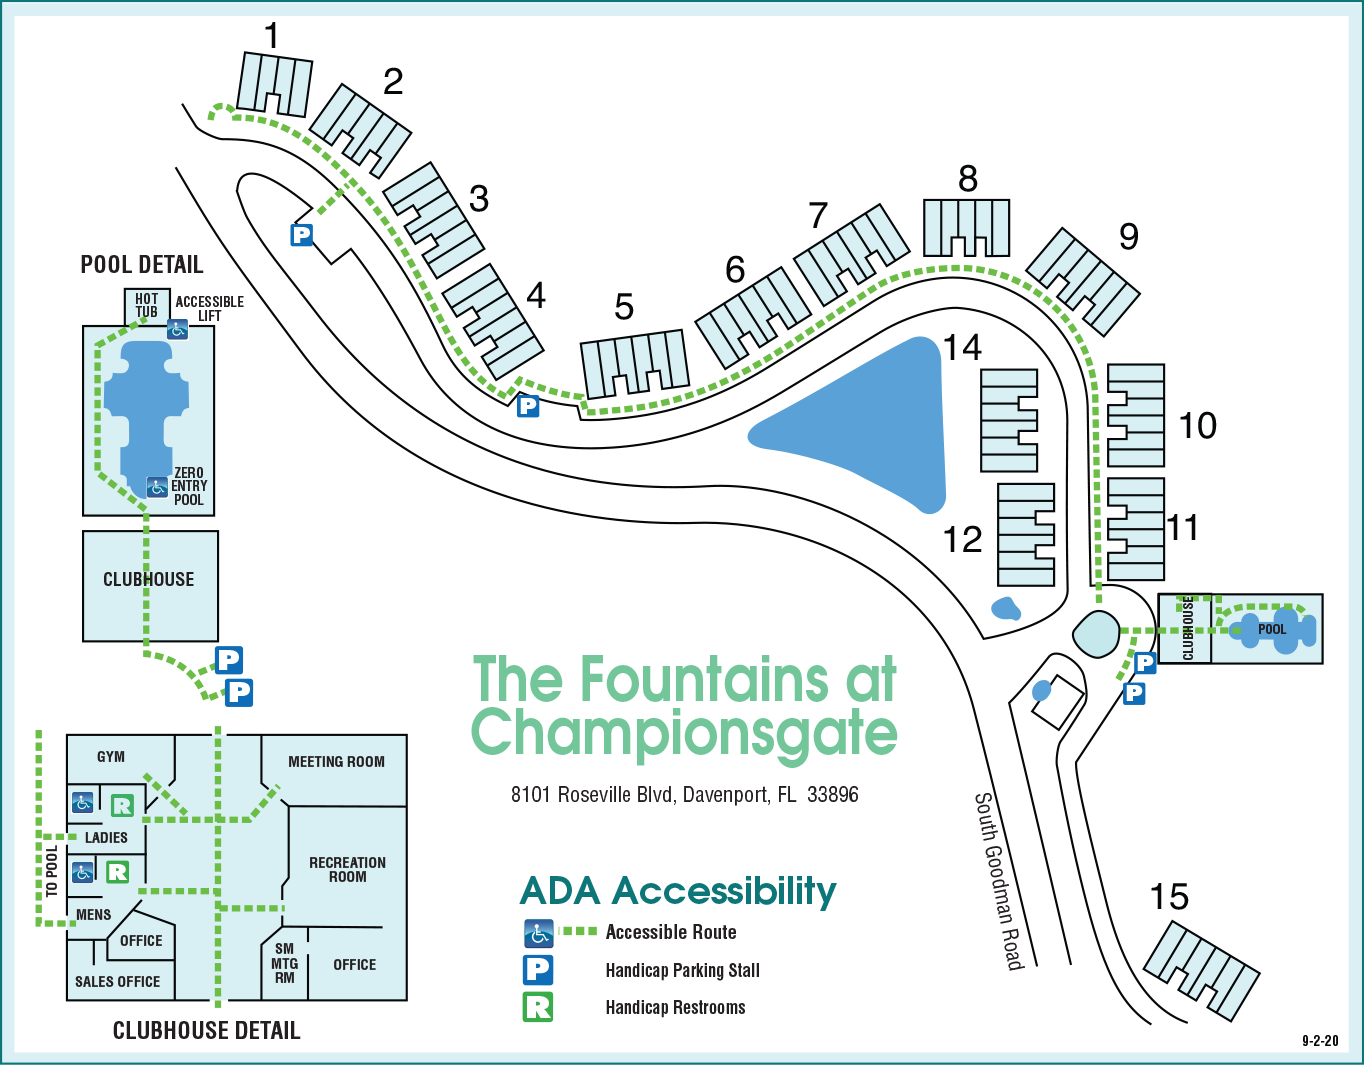 Accessibility map